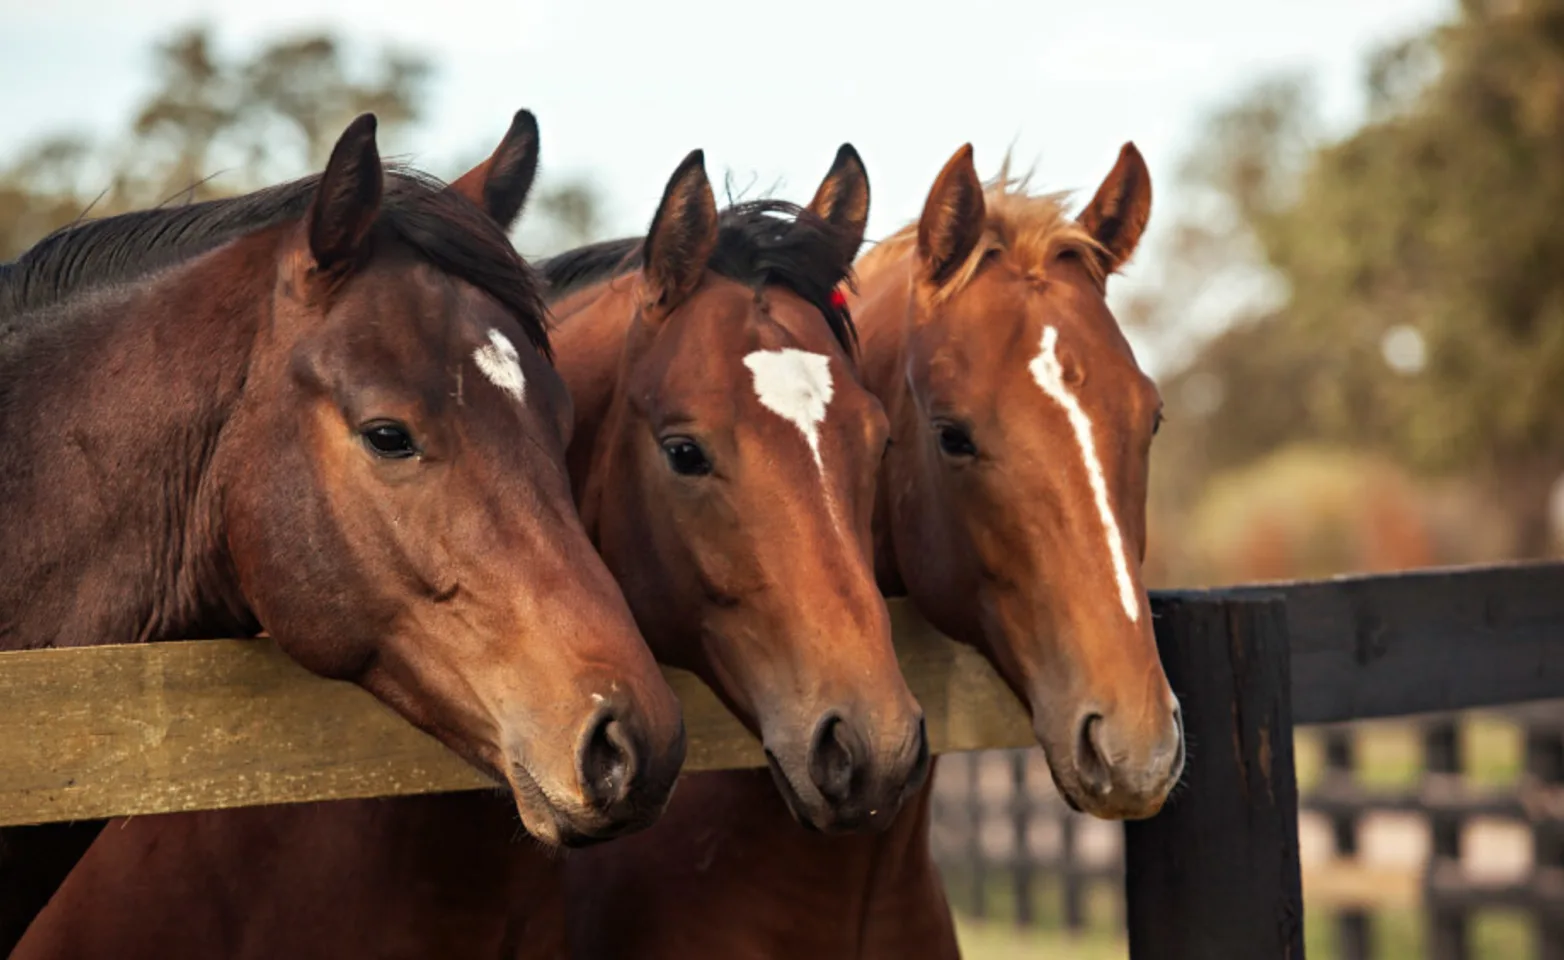 3 Horses looking over a fence